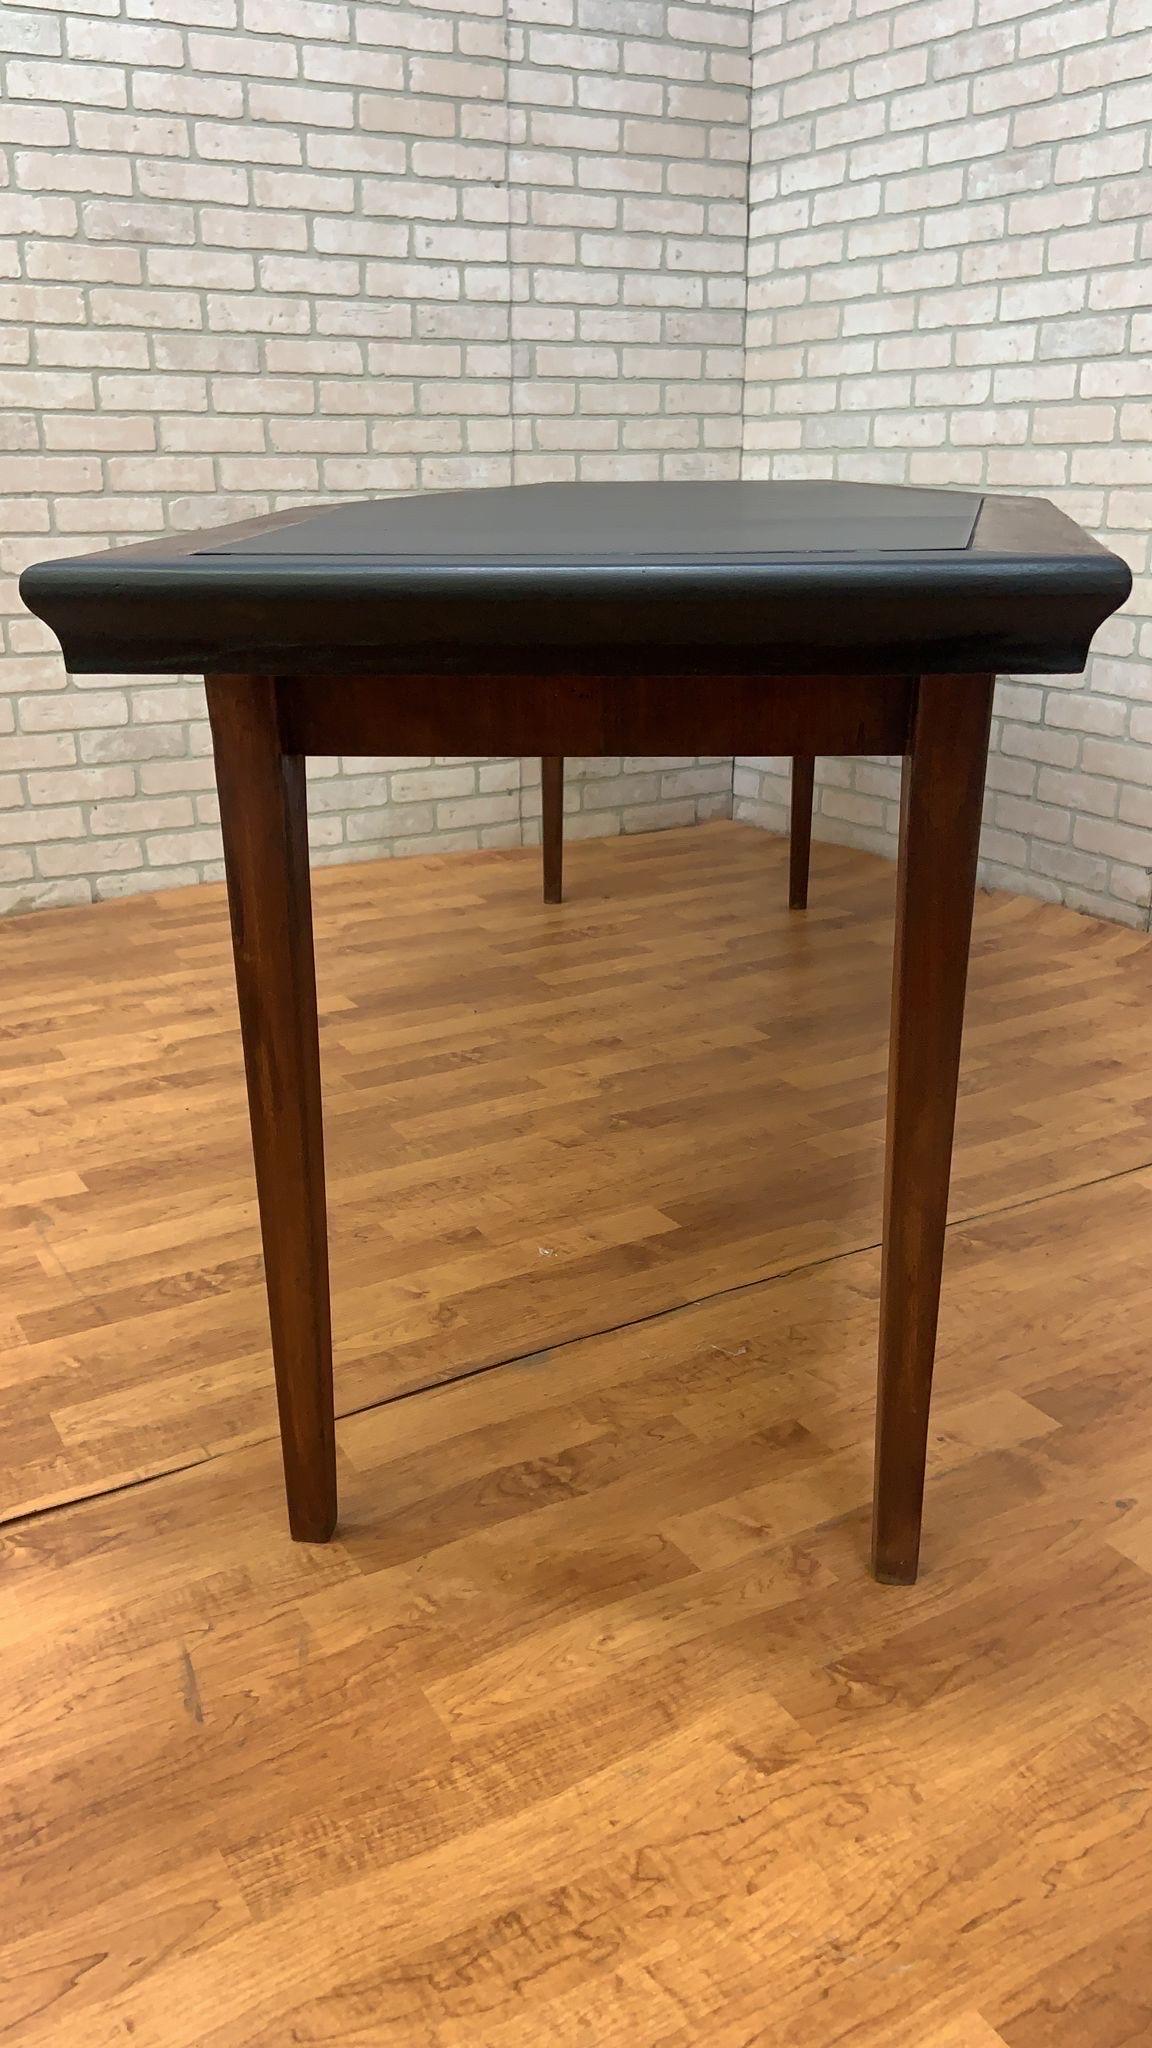 Late 20th Century Midcentury Danish Walnut Narrow Boat Shaped Table with Black Laminate Inlay For Sale